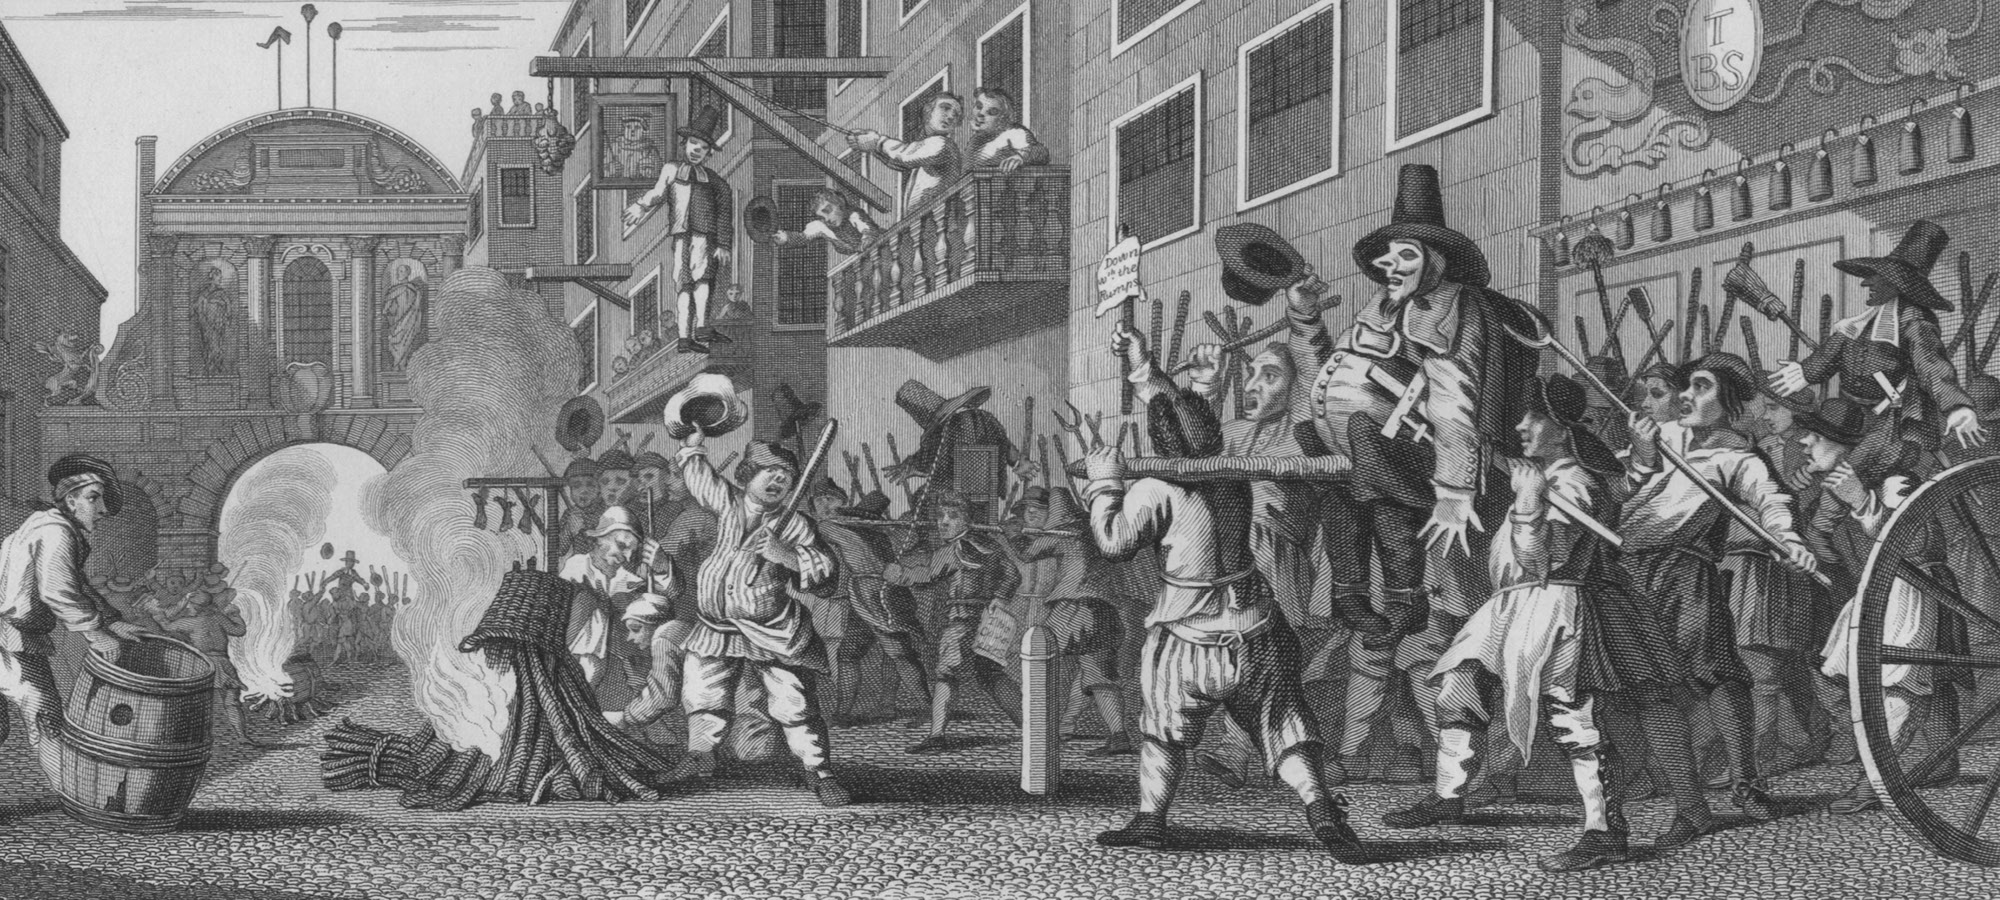 A history of printmaking & Hogarth’s place within it – a talk by Richard Roberts